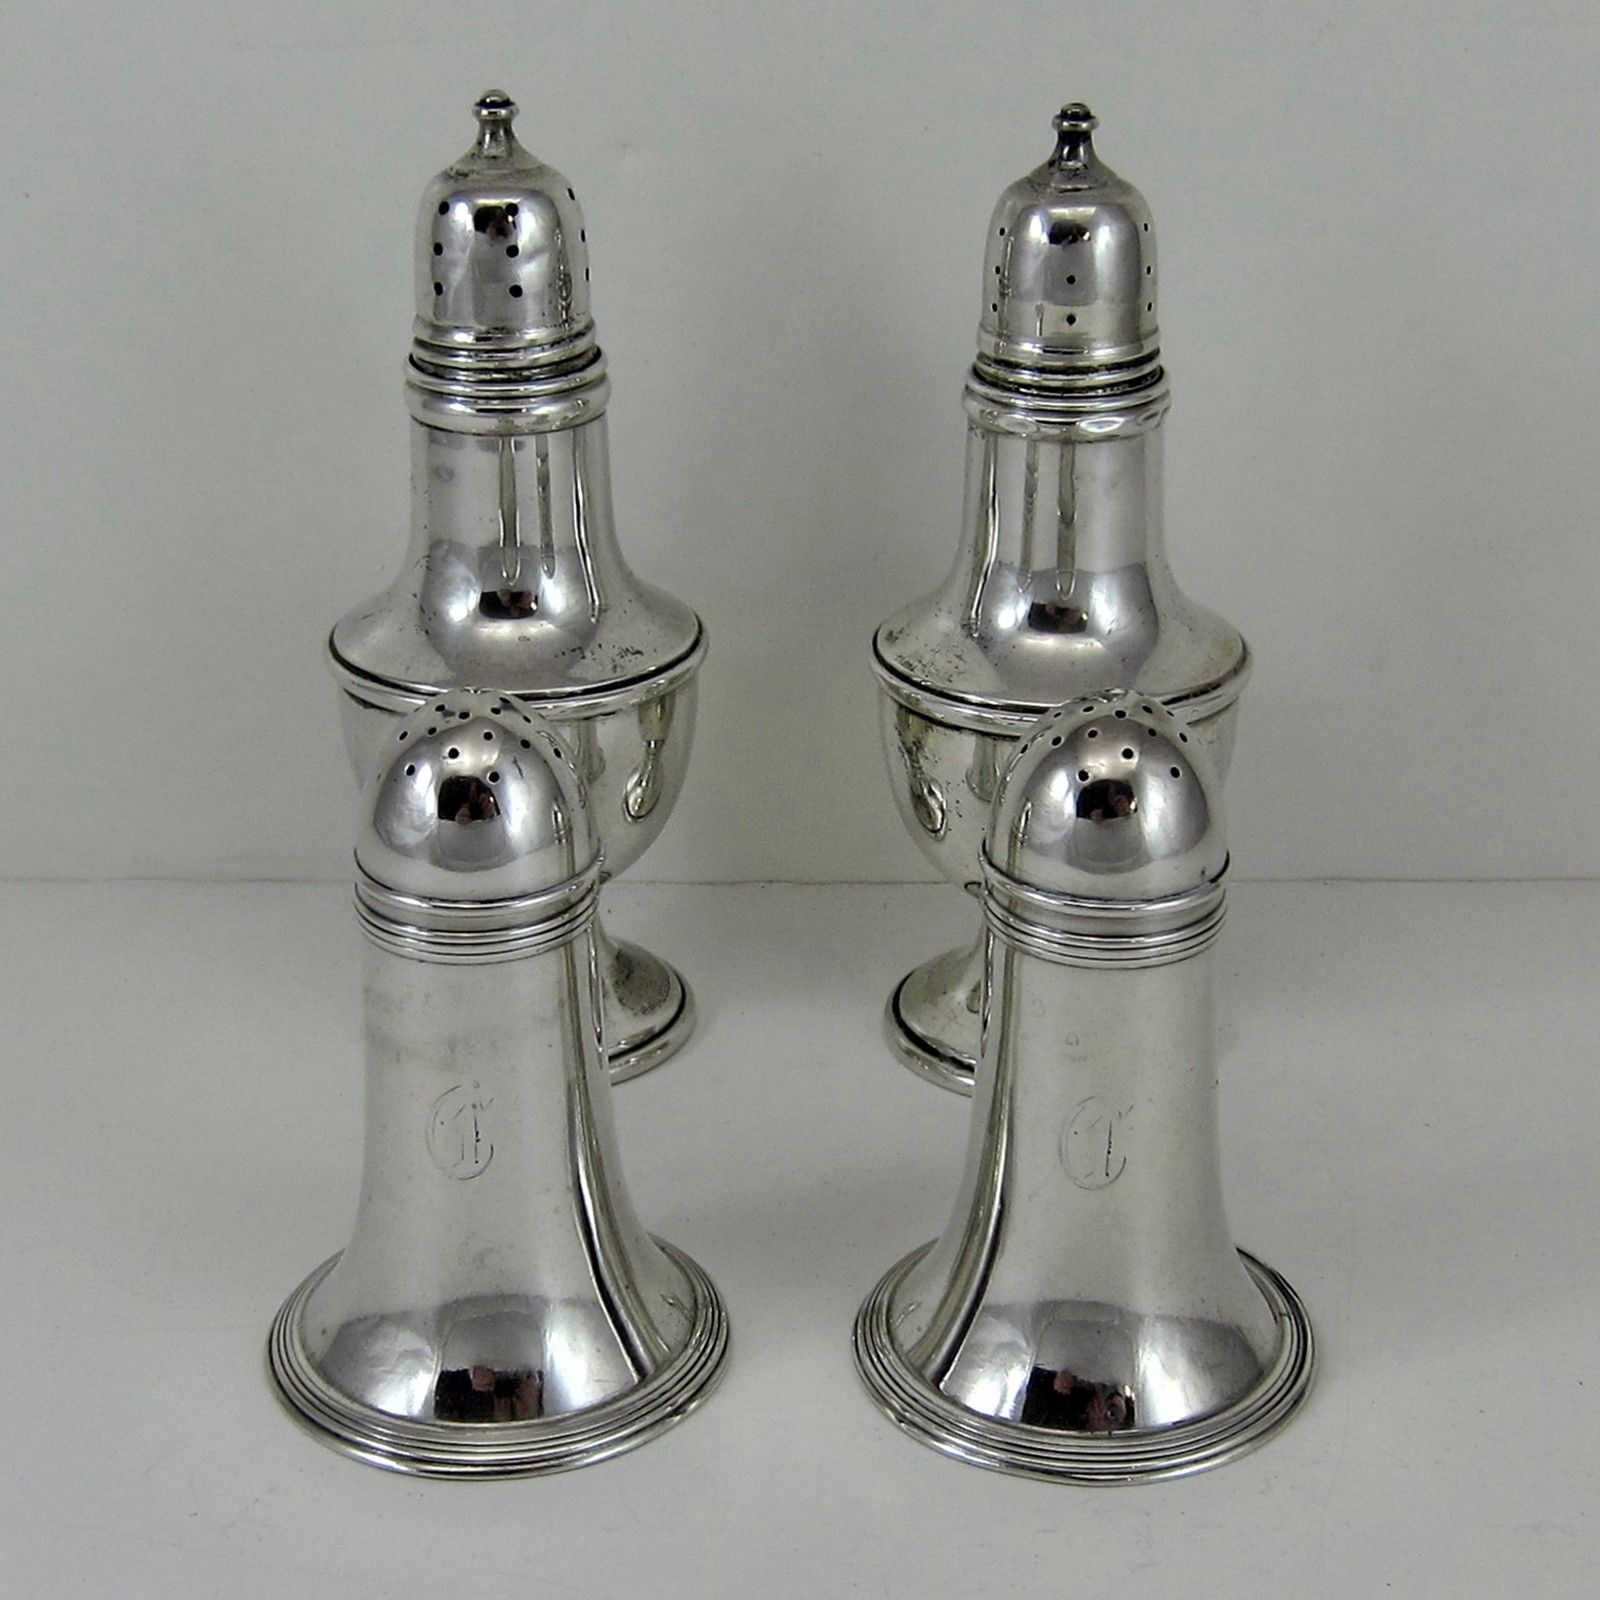 Collecting Vintage Salt and Pepper Shakers